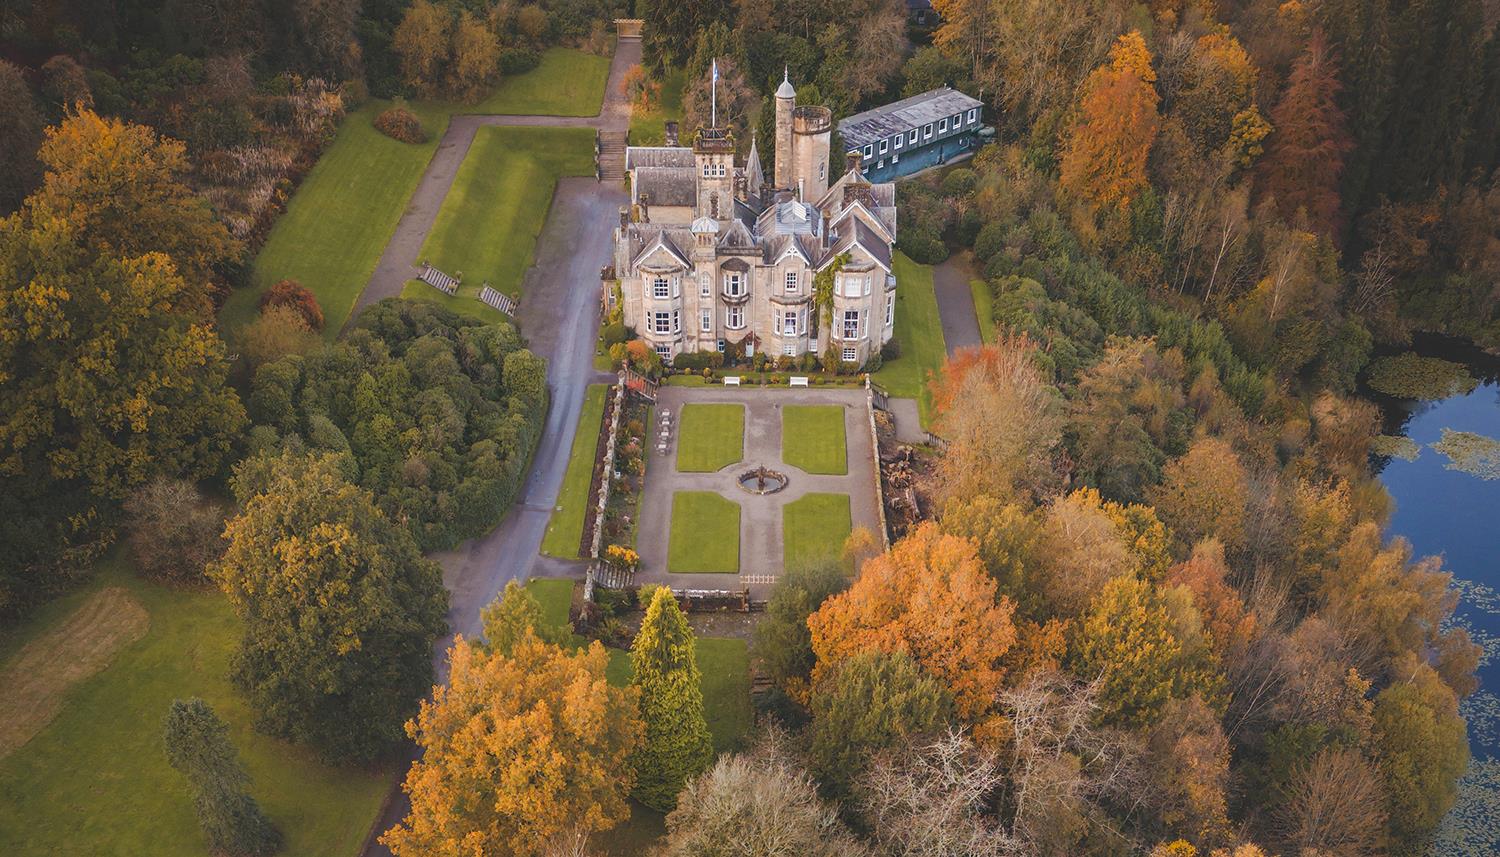 Ariel view of the venue. Photo Credit: Duncan Ireland Photography